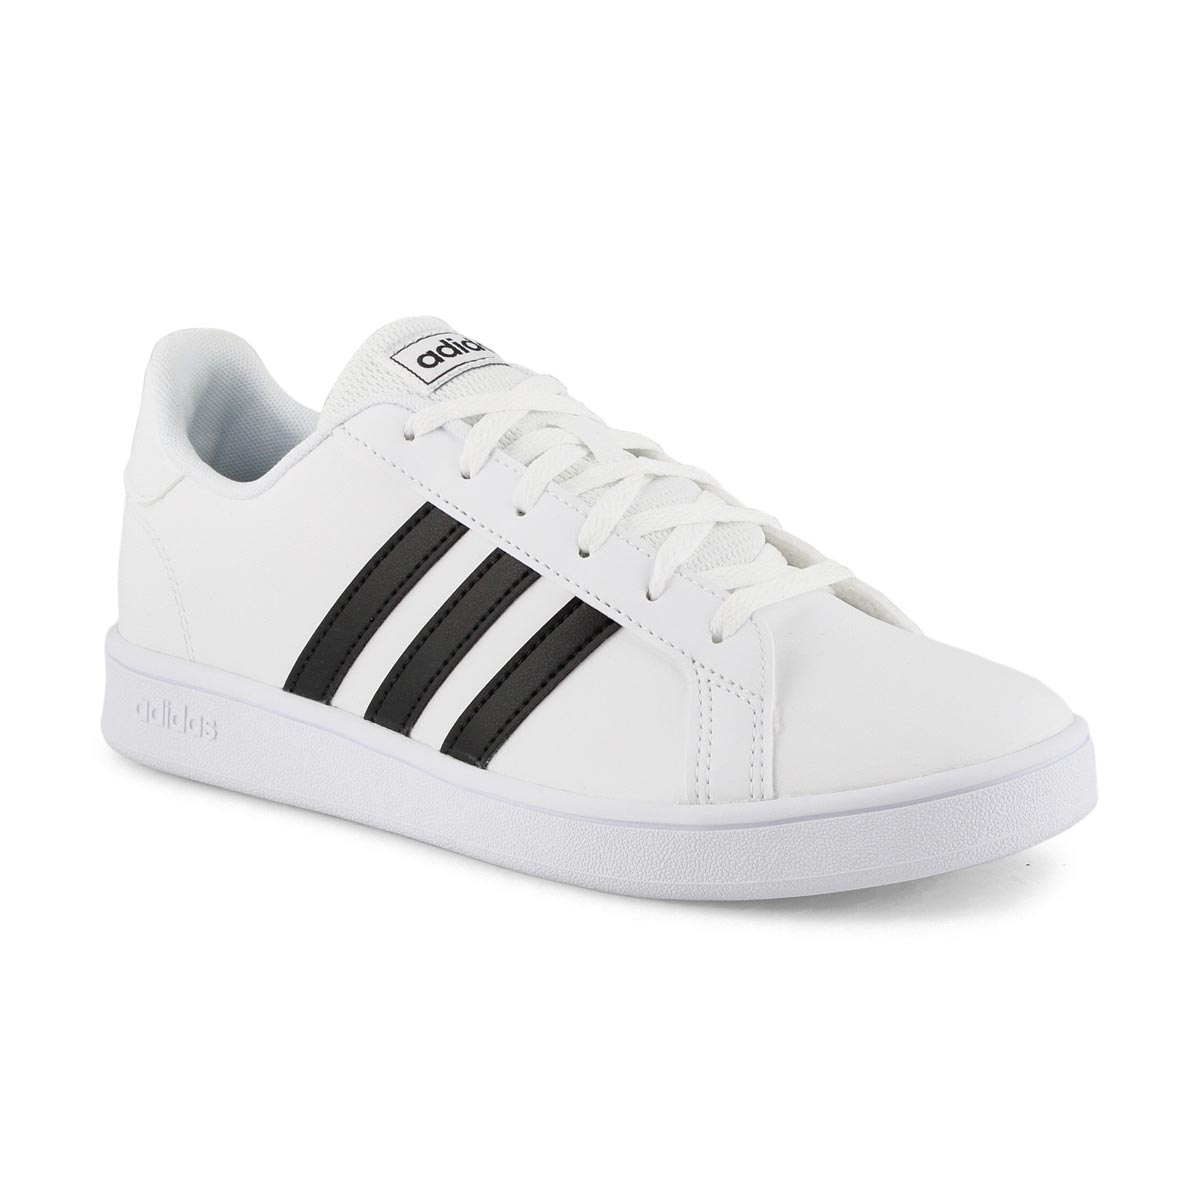 adidas youth grand court